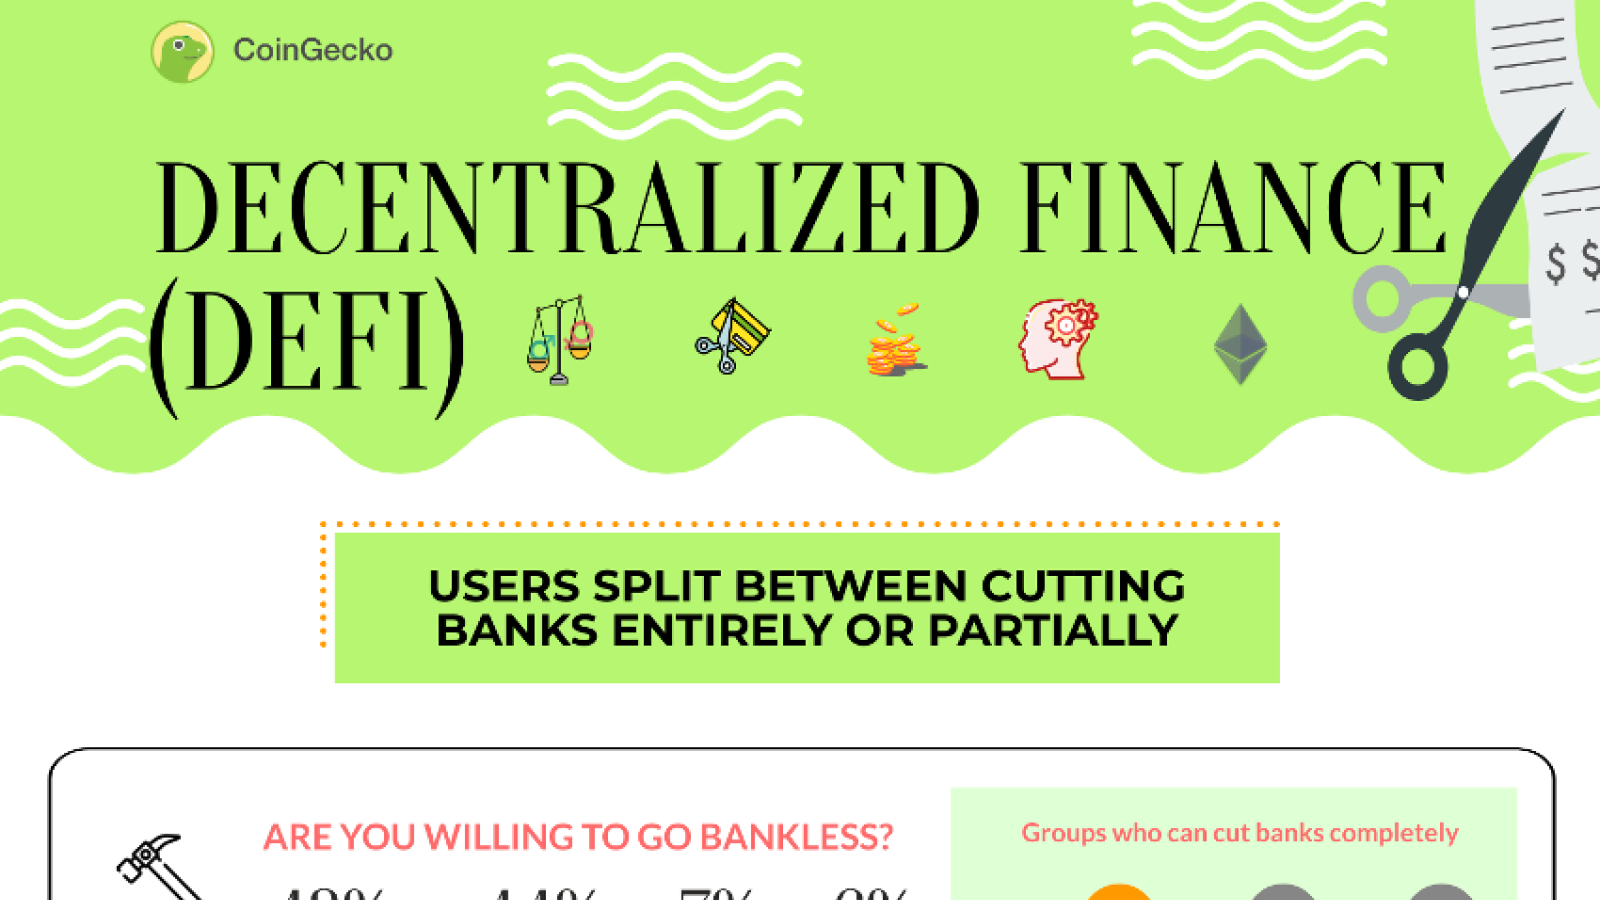 91% of the users familiar with DeFi are ready to abandon banks